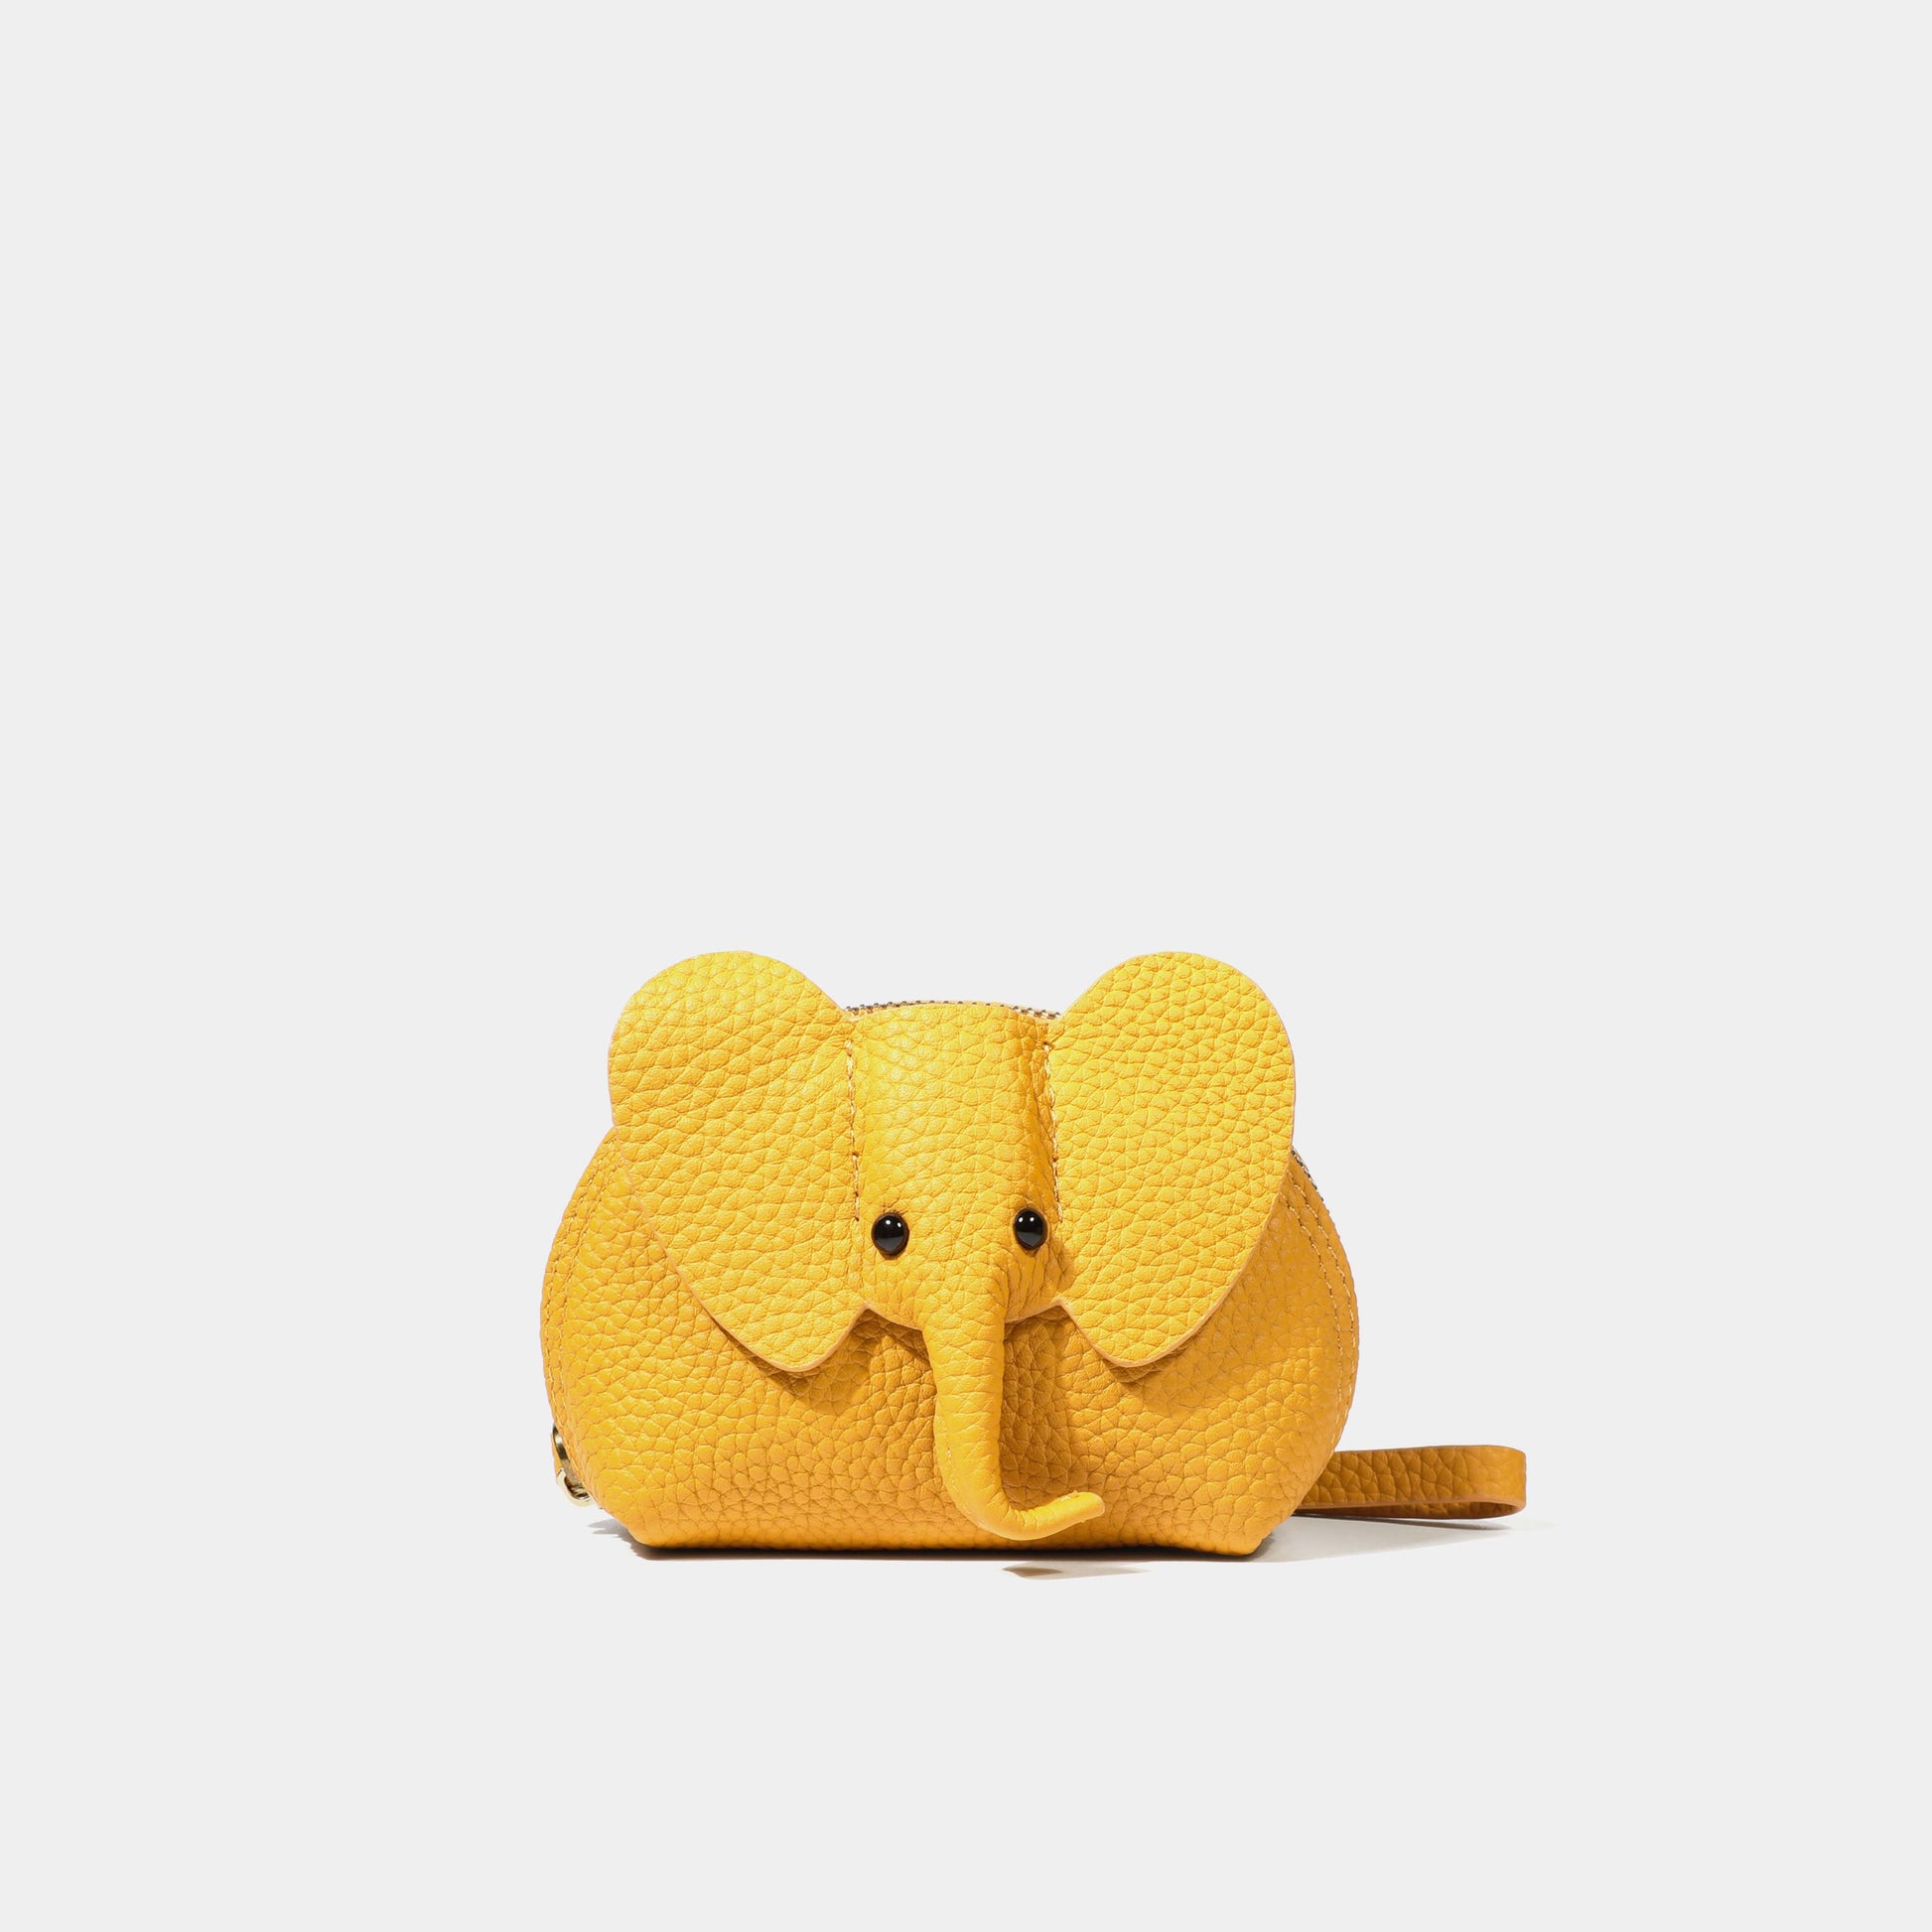 Elephant Leather Coins Purse-Calf Leather Coins Purse-Yellow